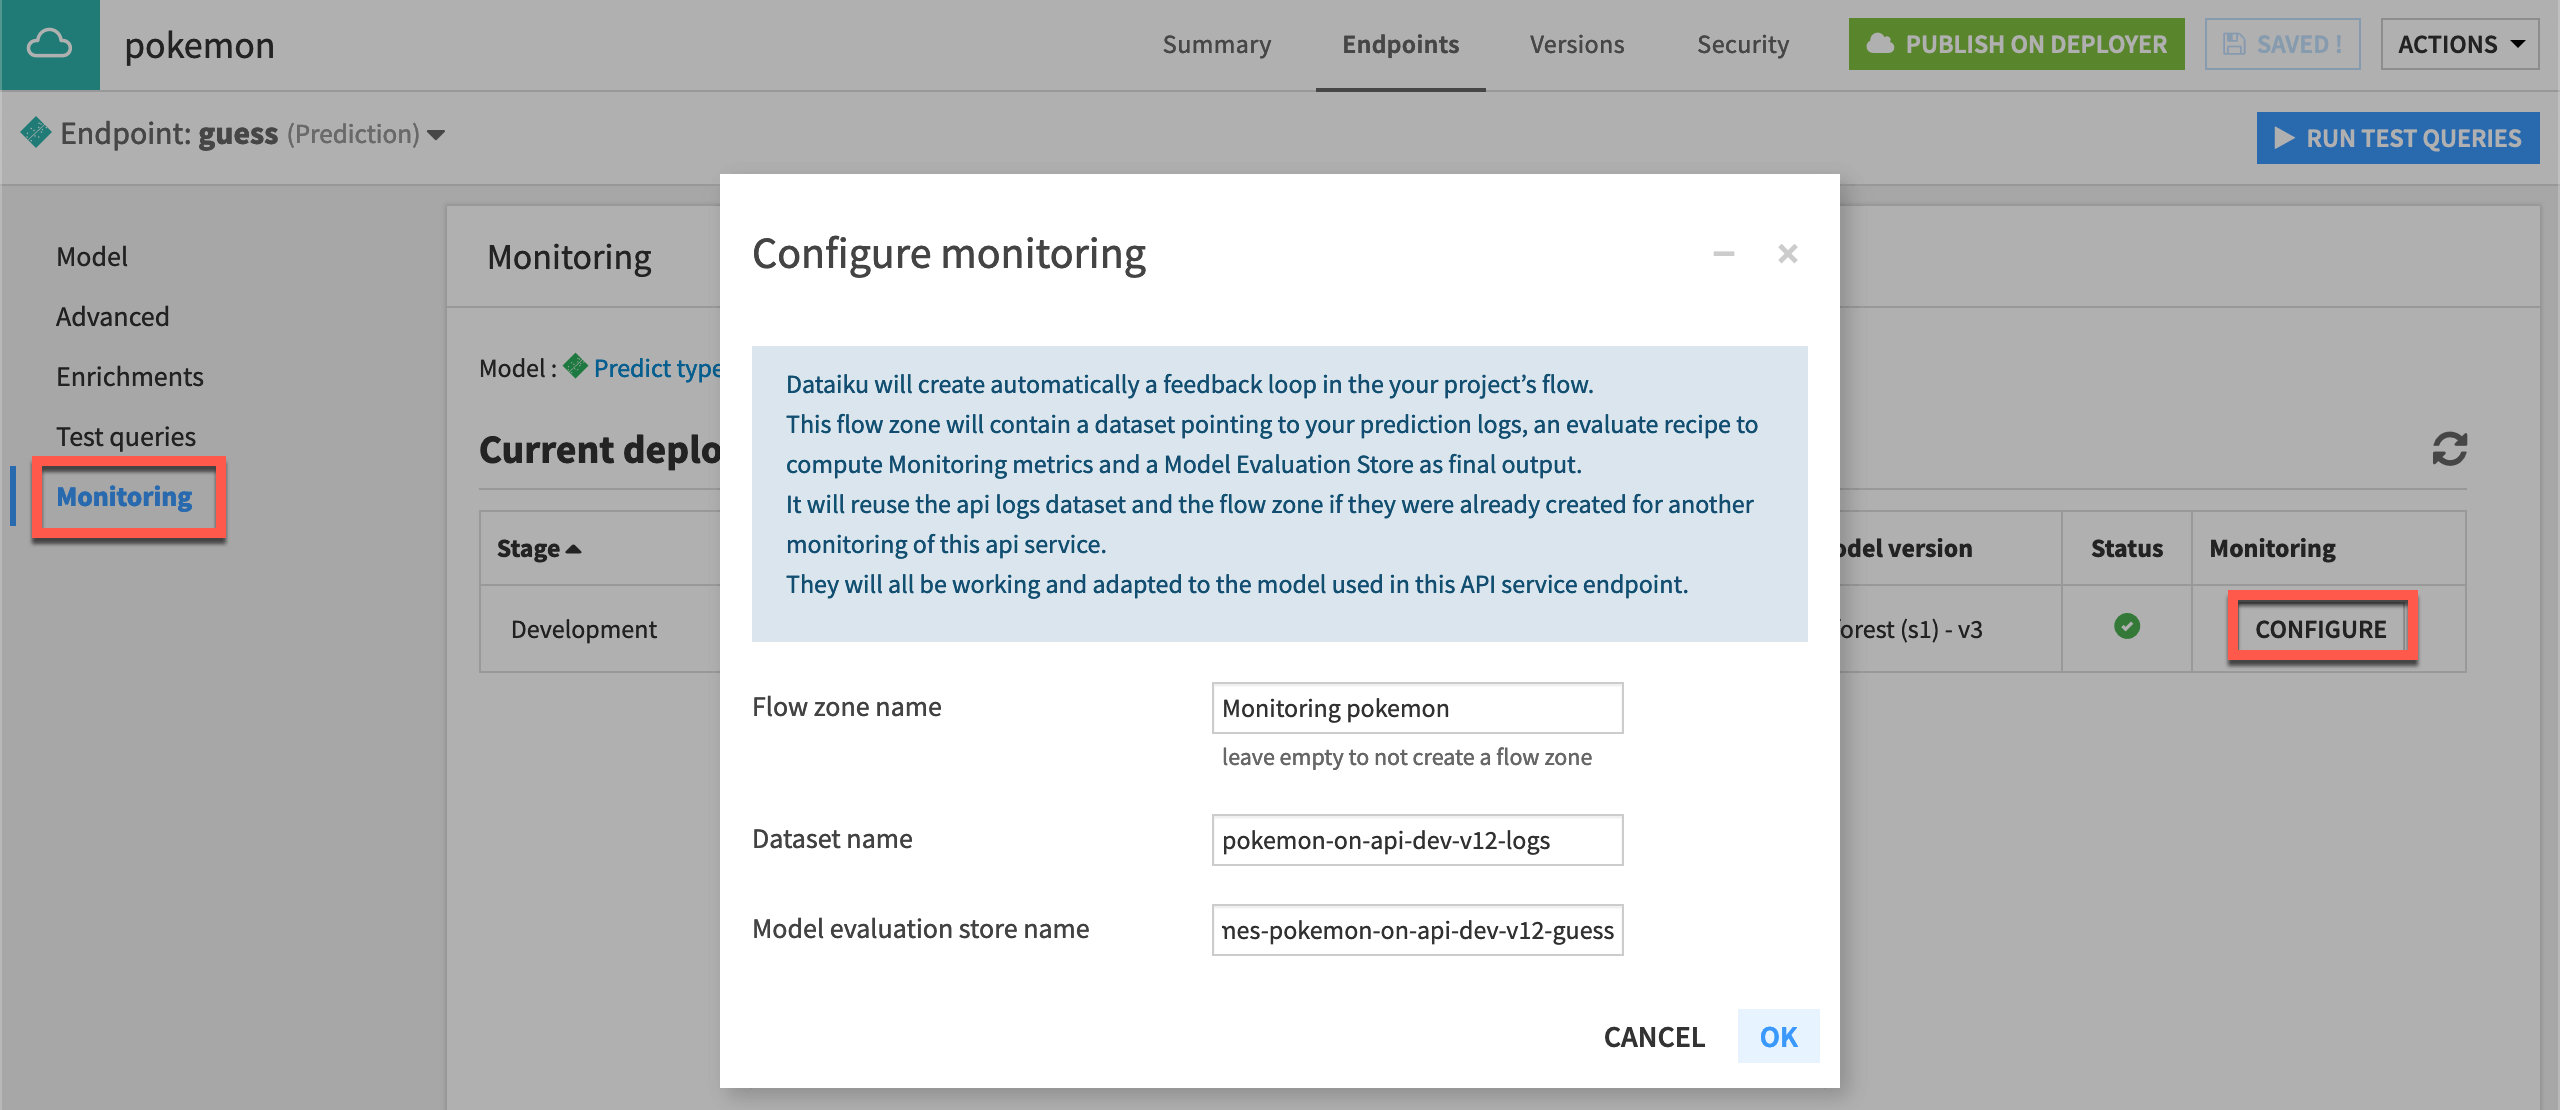 Dataiku screenshot of the Monitoring panel within the API endpoint of the API Designer.